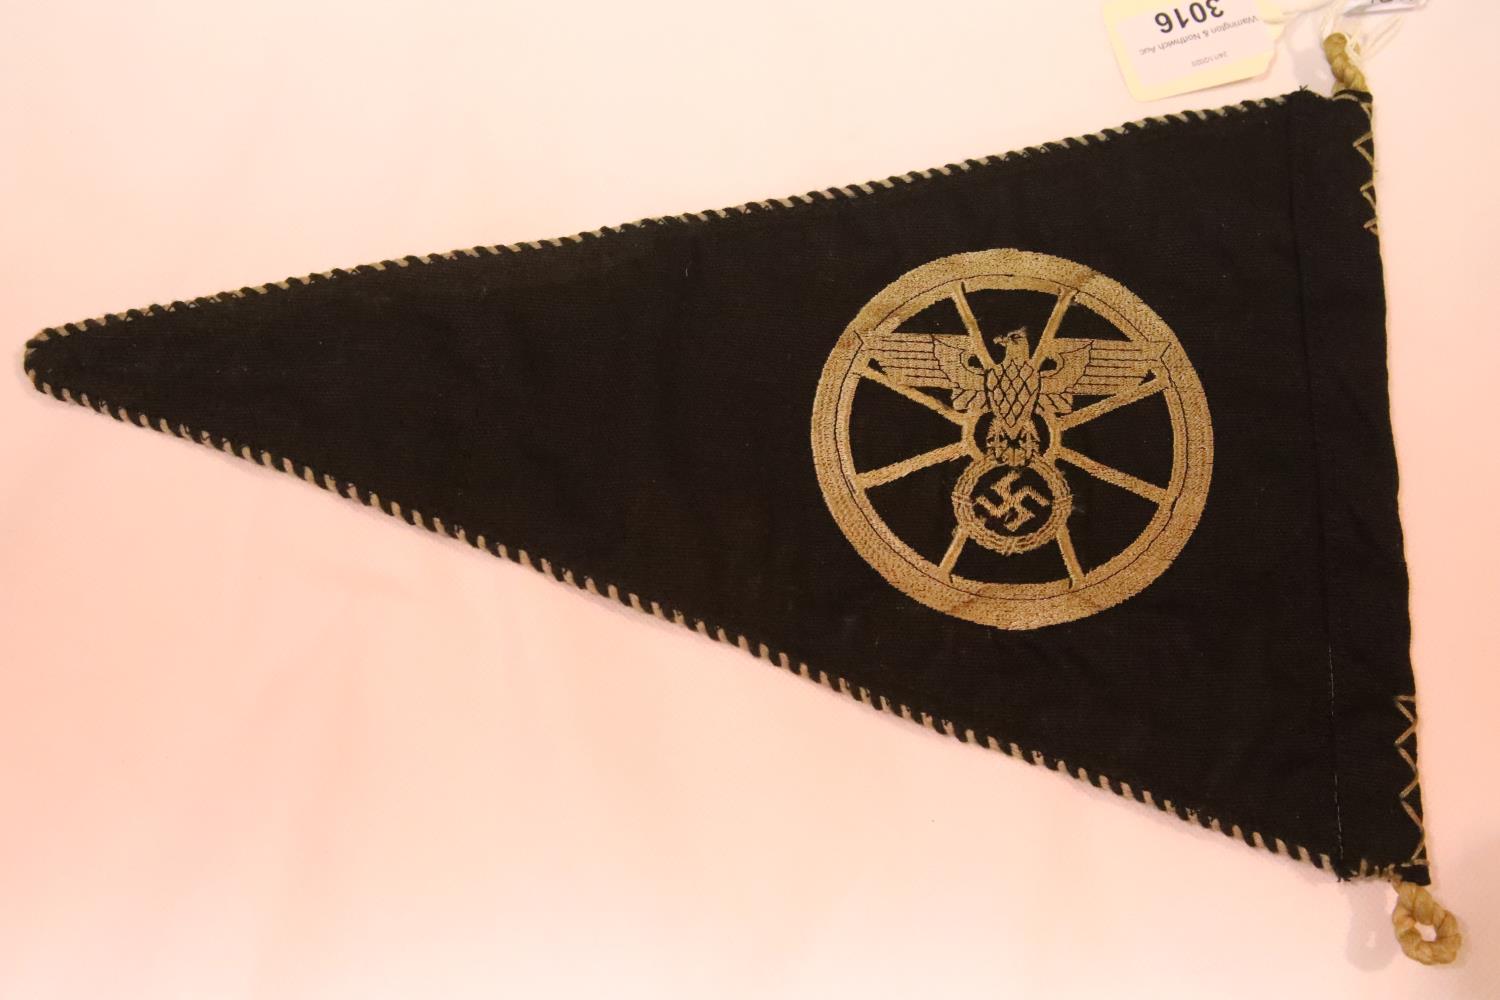 German WWII type NSKK pennant, L: 34 cm. P&P Group 1 (£14+VAT for the first lot and £1+VAT for - Image 2 of 2